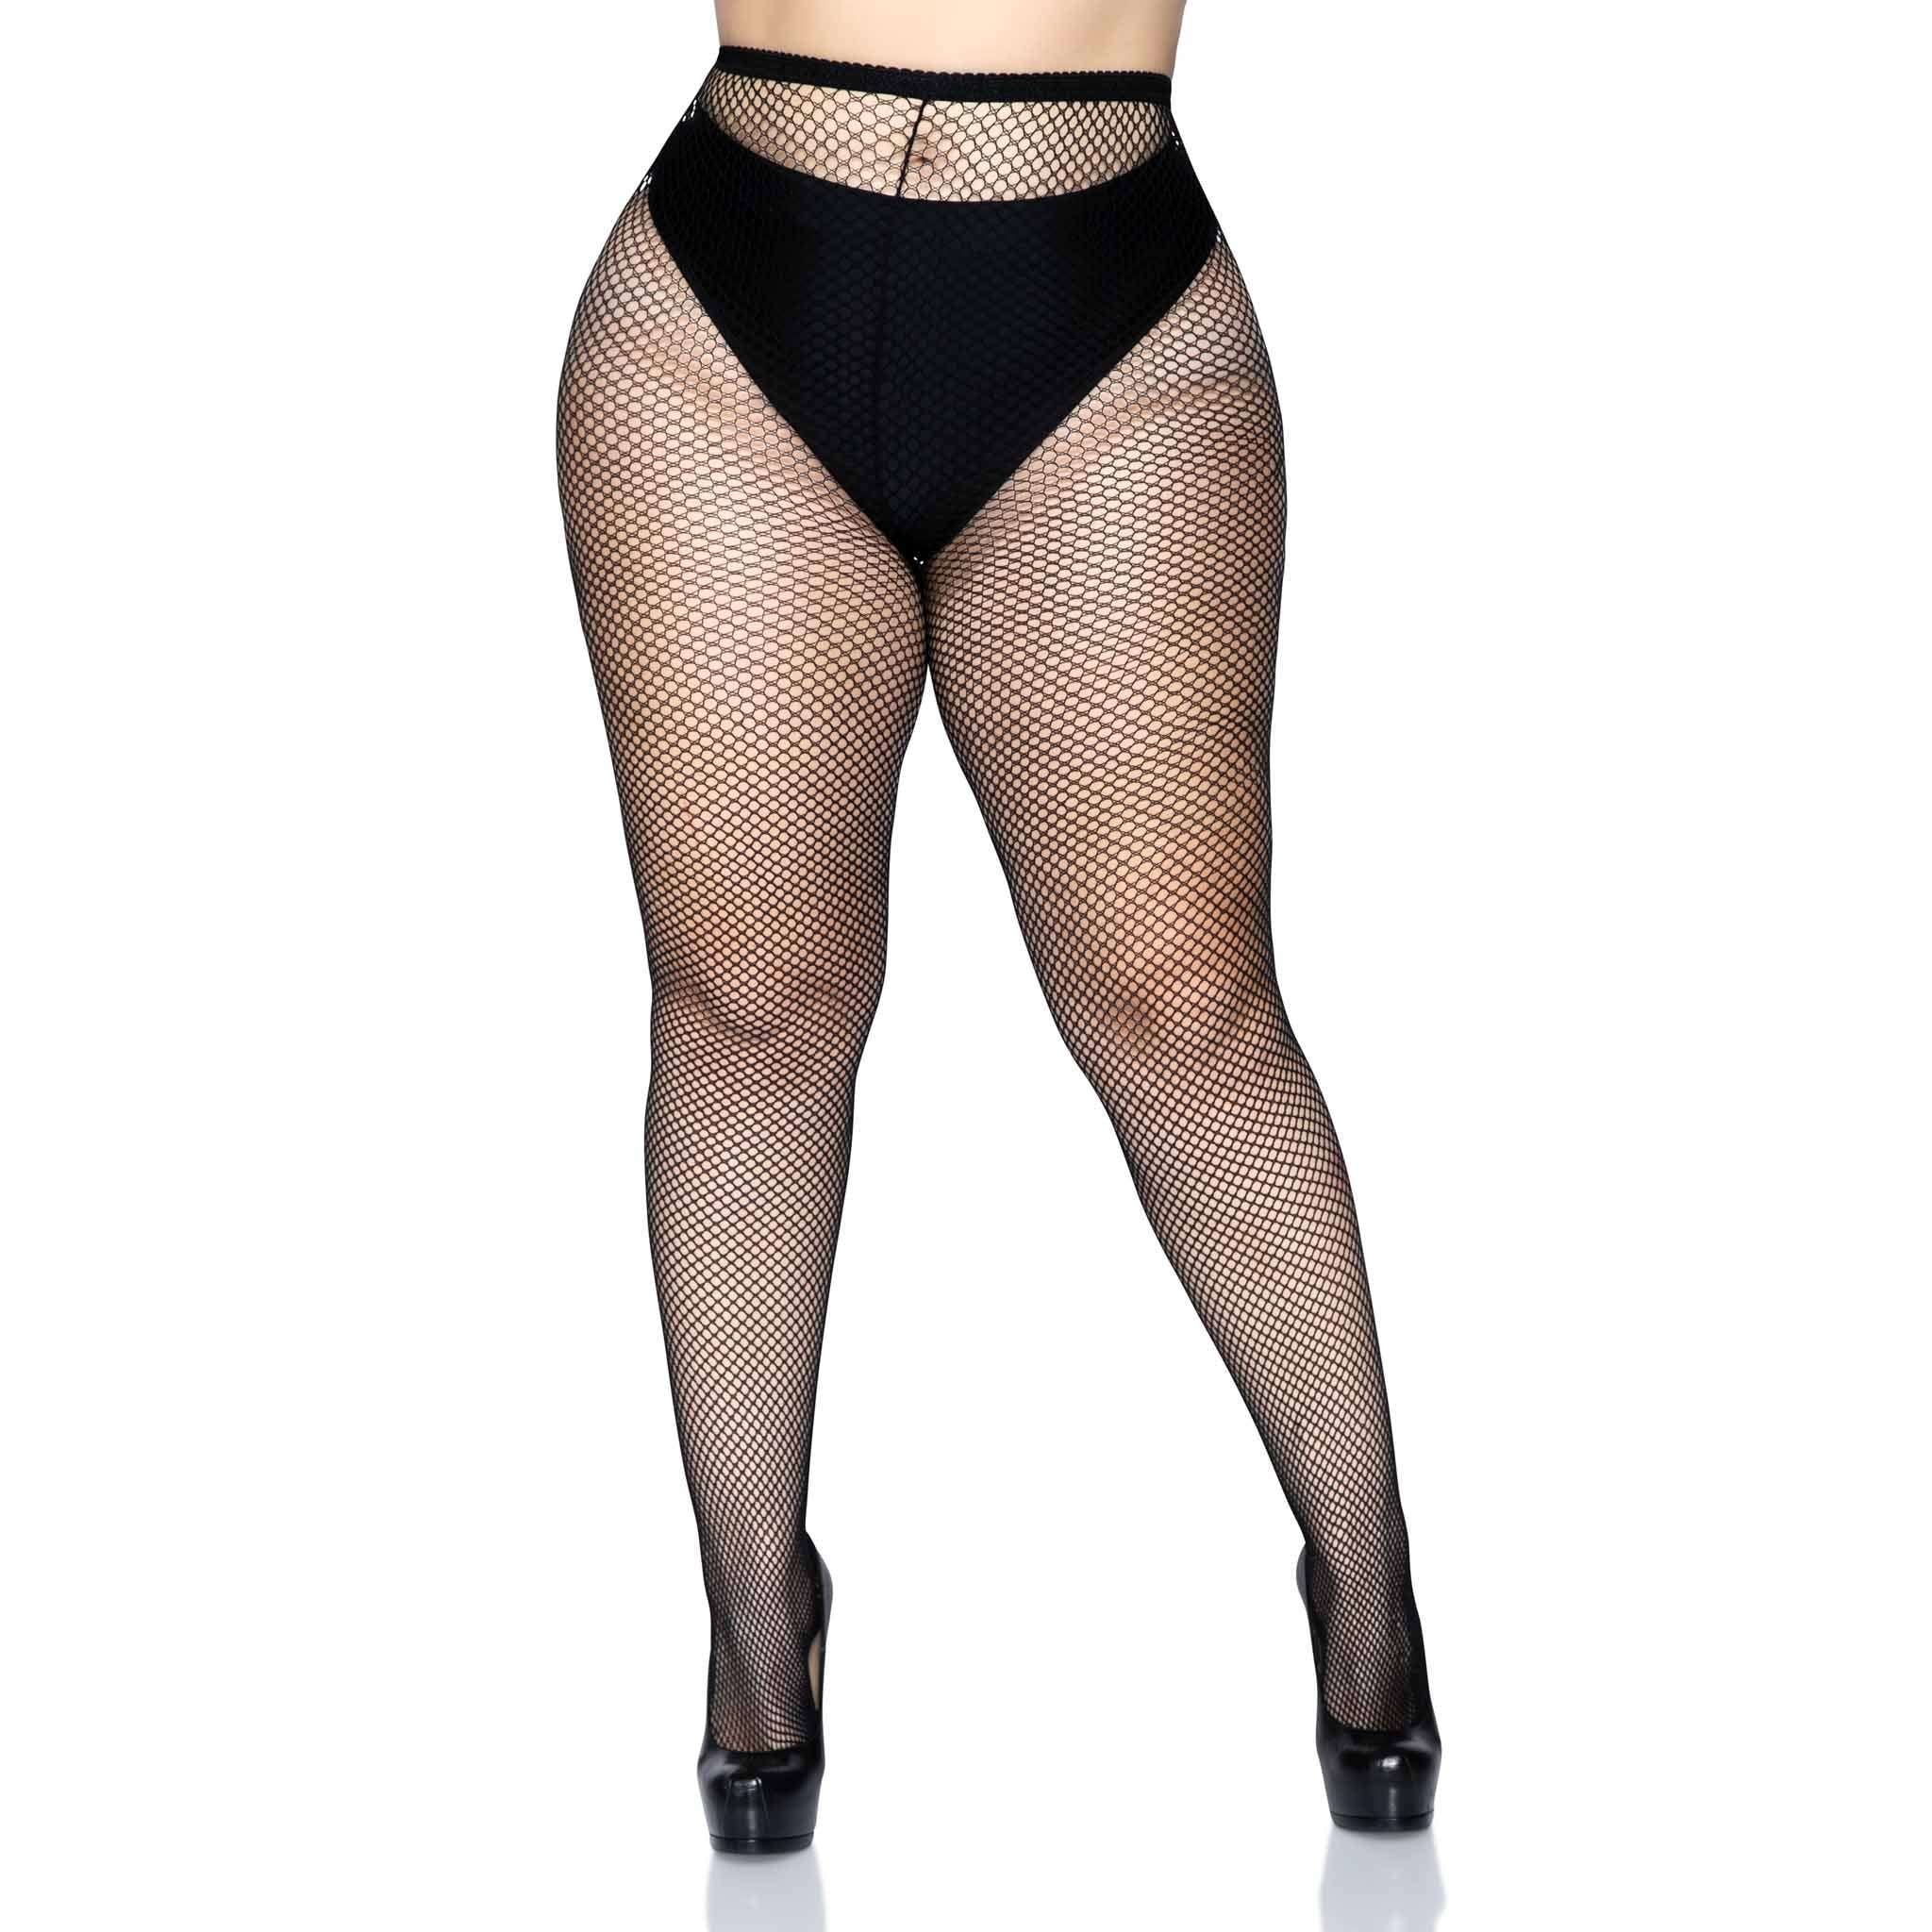 Plus Patterned Fishnet Tights